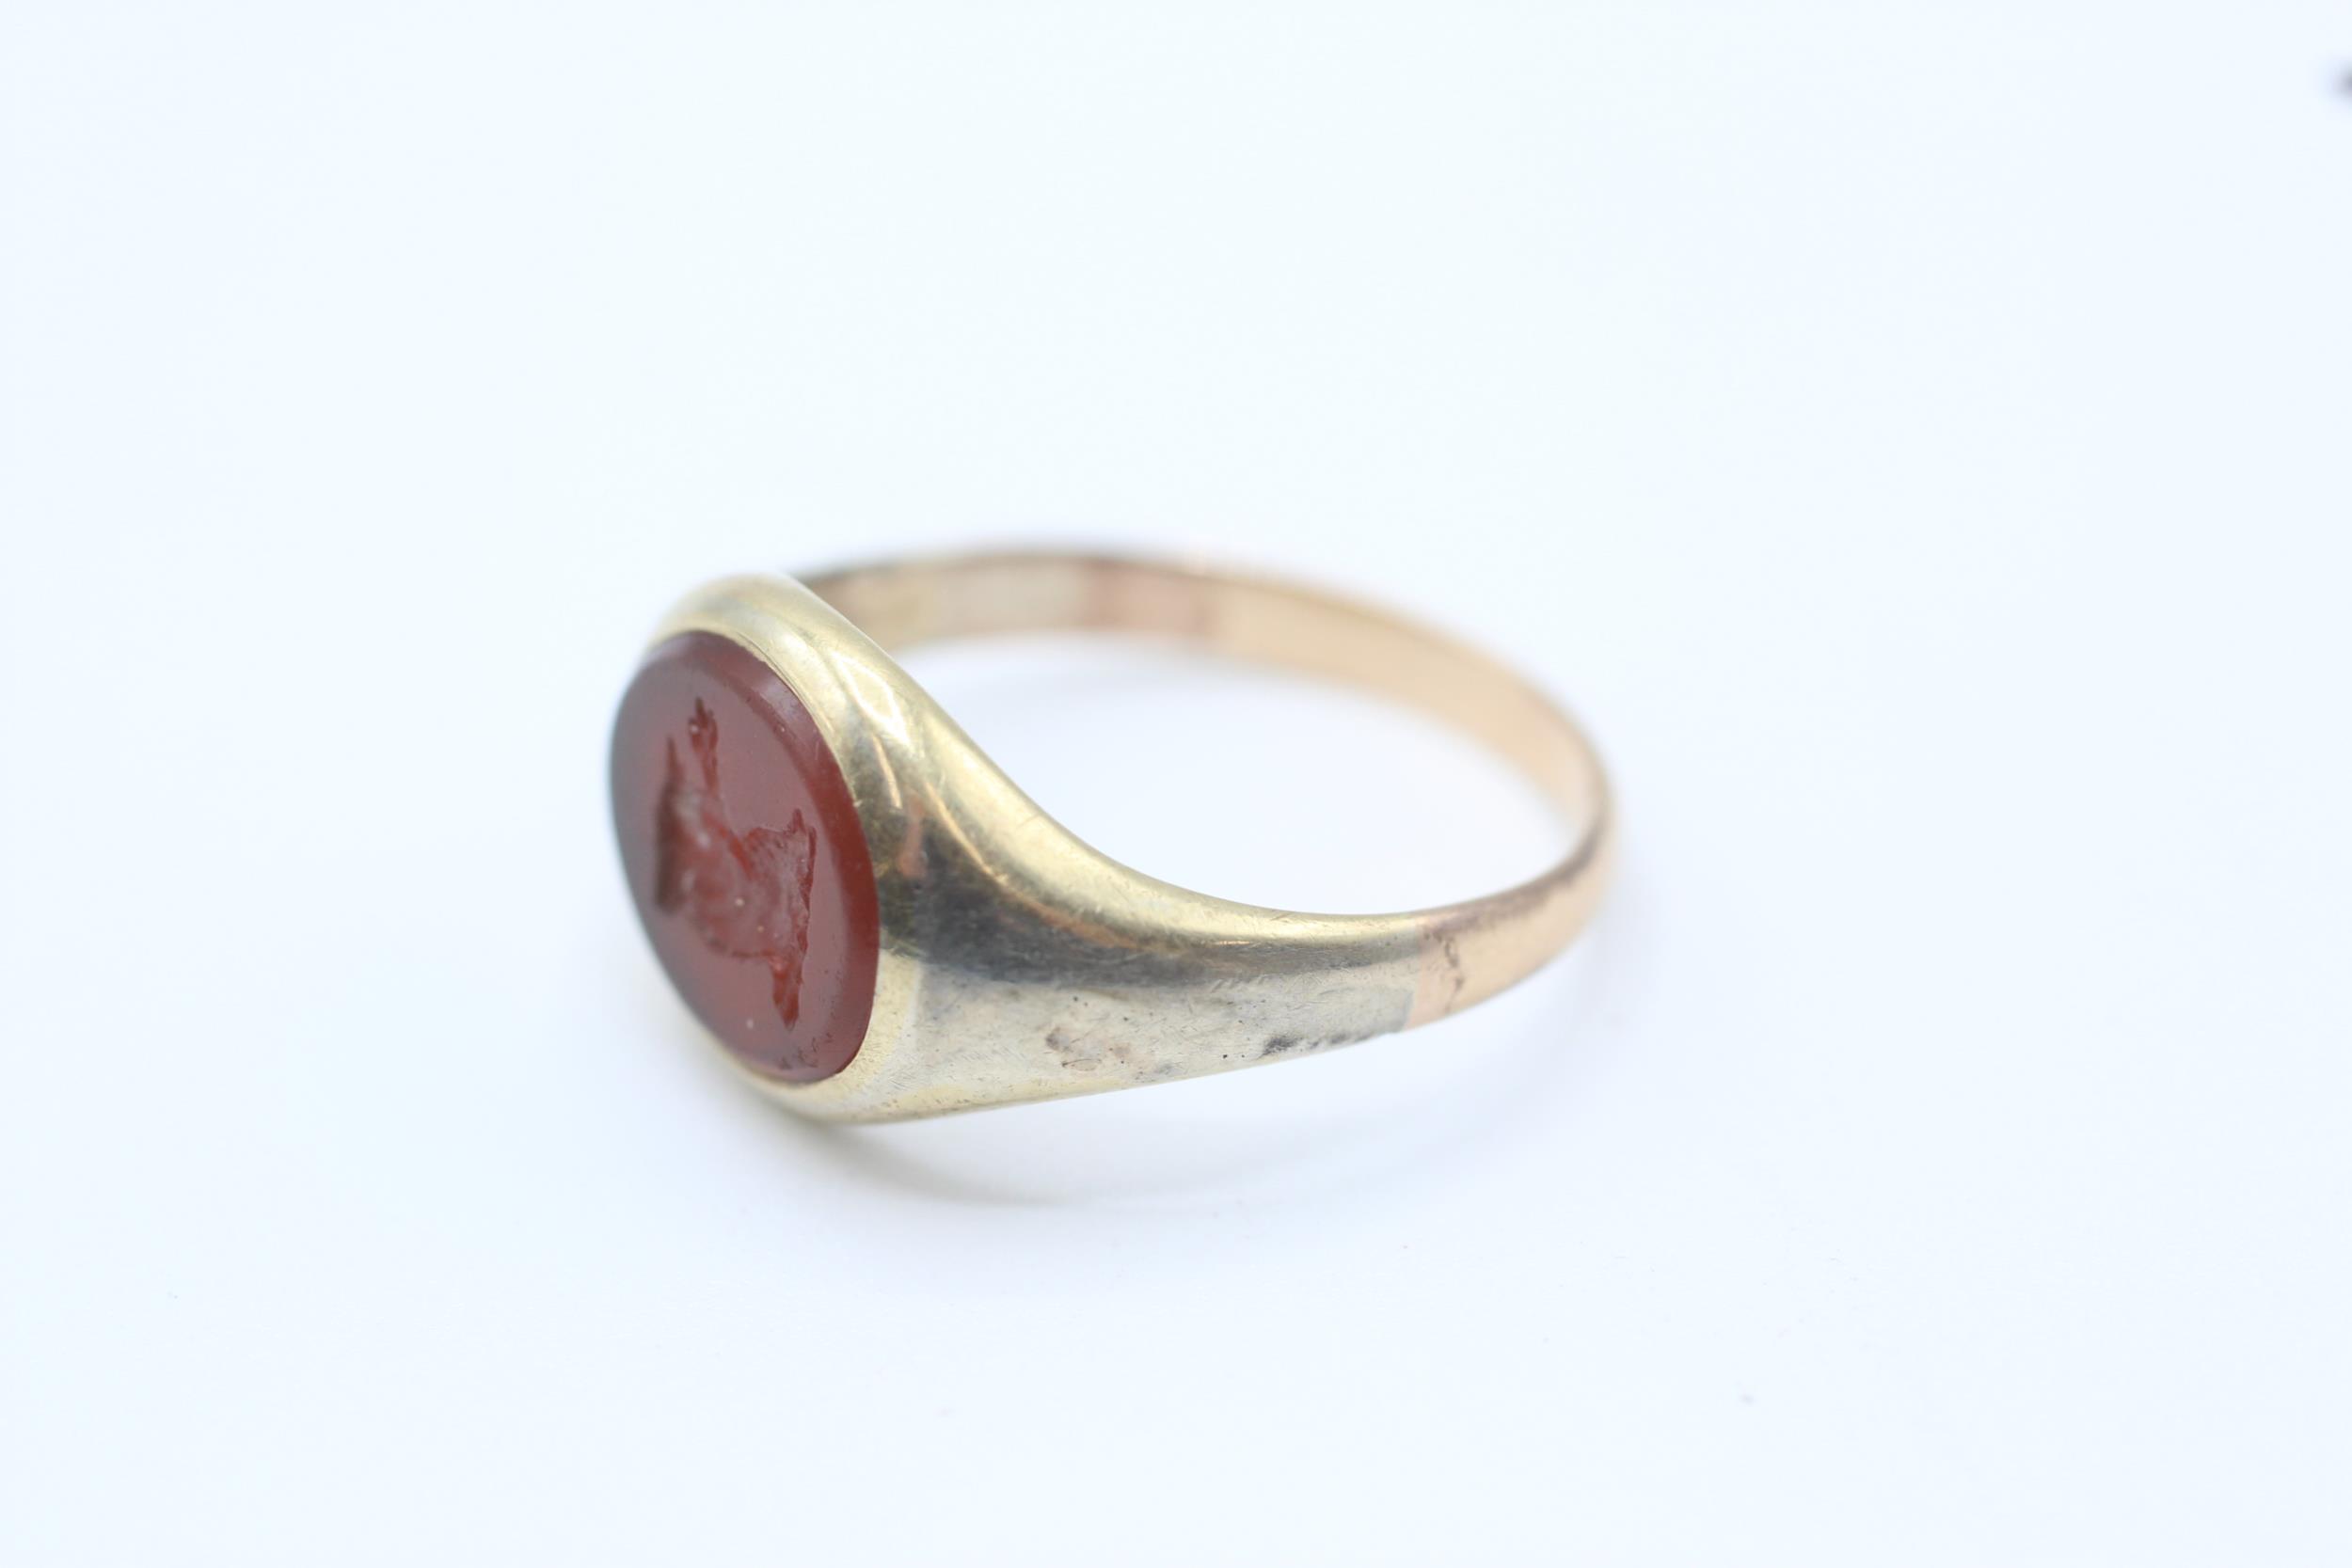 14ct gold band and 5ct gold headed antique carnelian bull intaglio set signet ring - as seen Size - Image 5 of 5